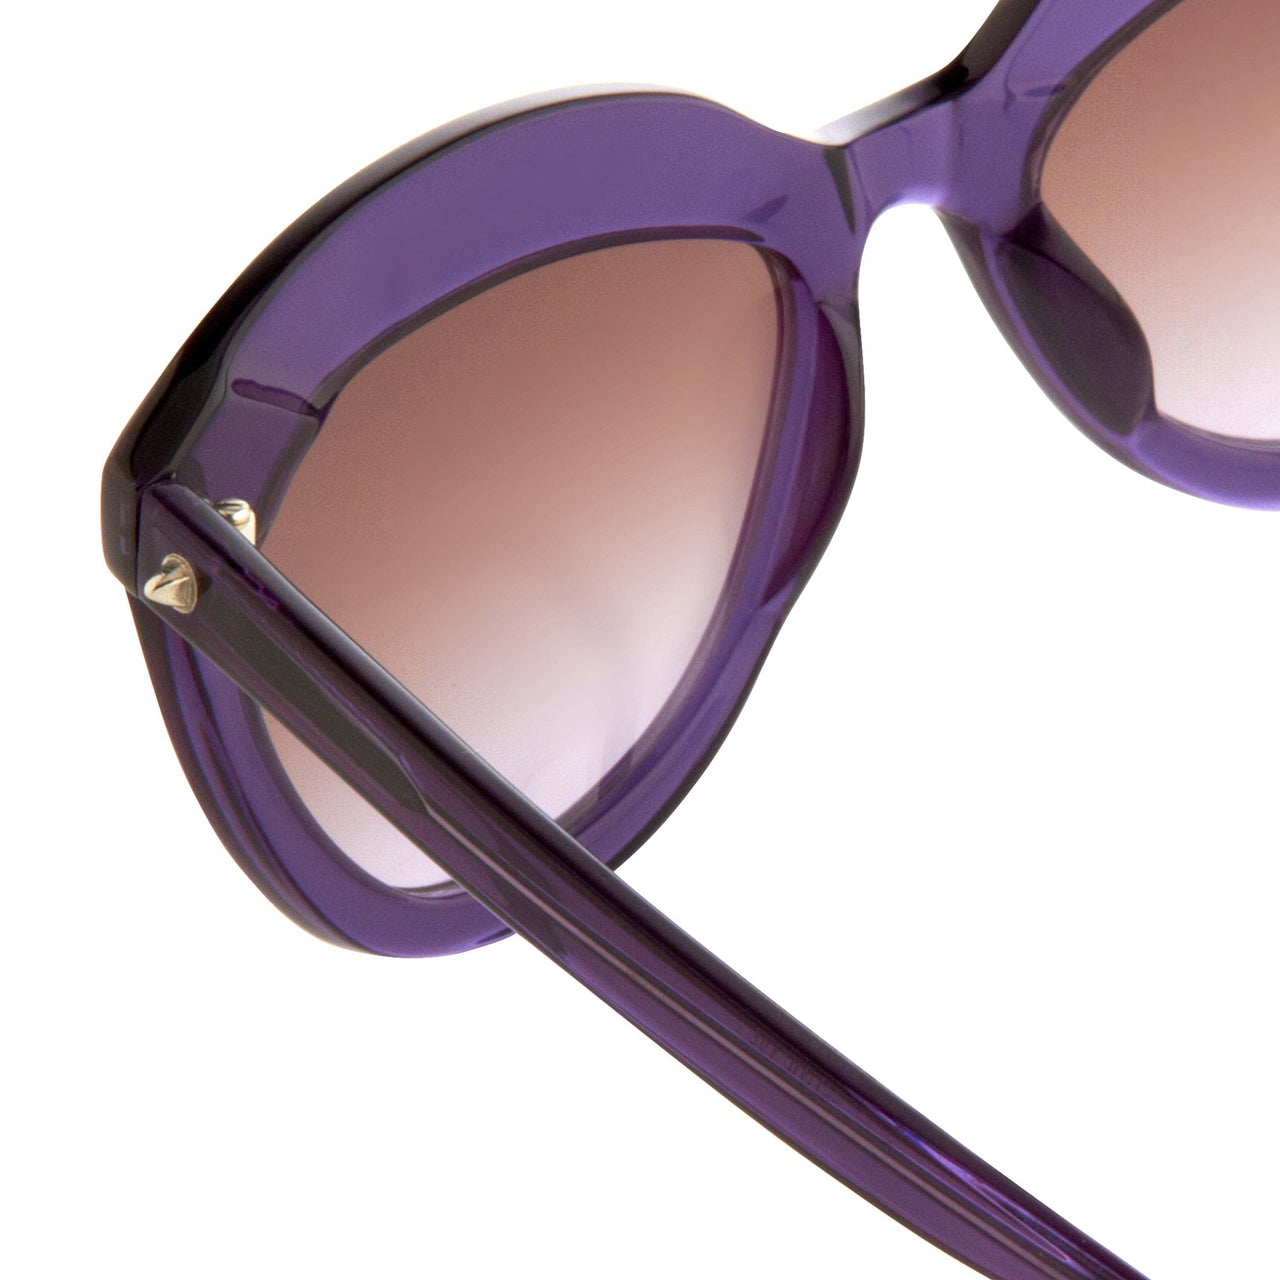 Agent Provocateur Sunglasses Cat Eye Purple and Brown Graduated Lenses - AP45C5SUN - Watches & Crystals